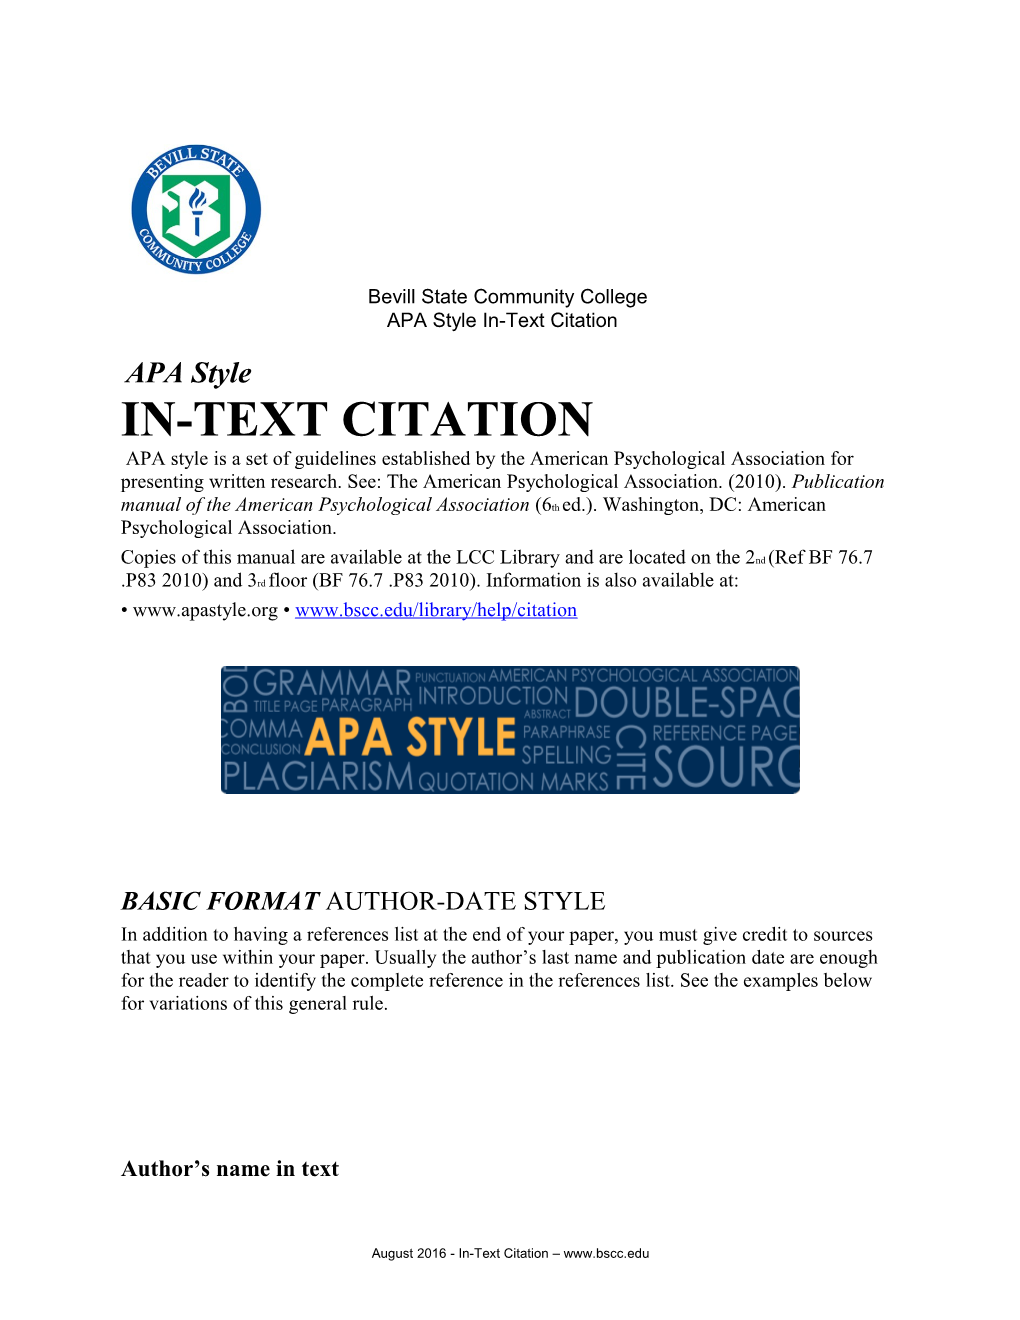 APA Style In-Text Citation